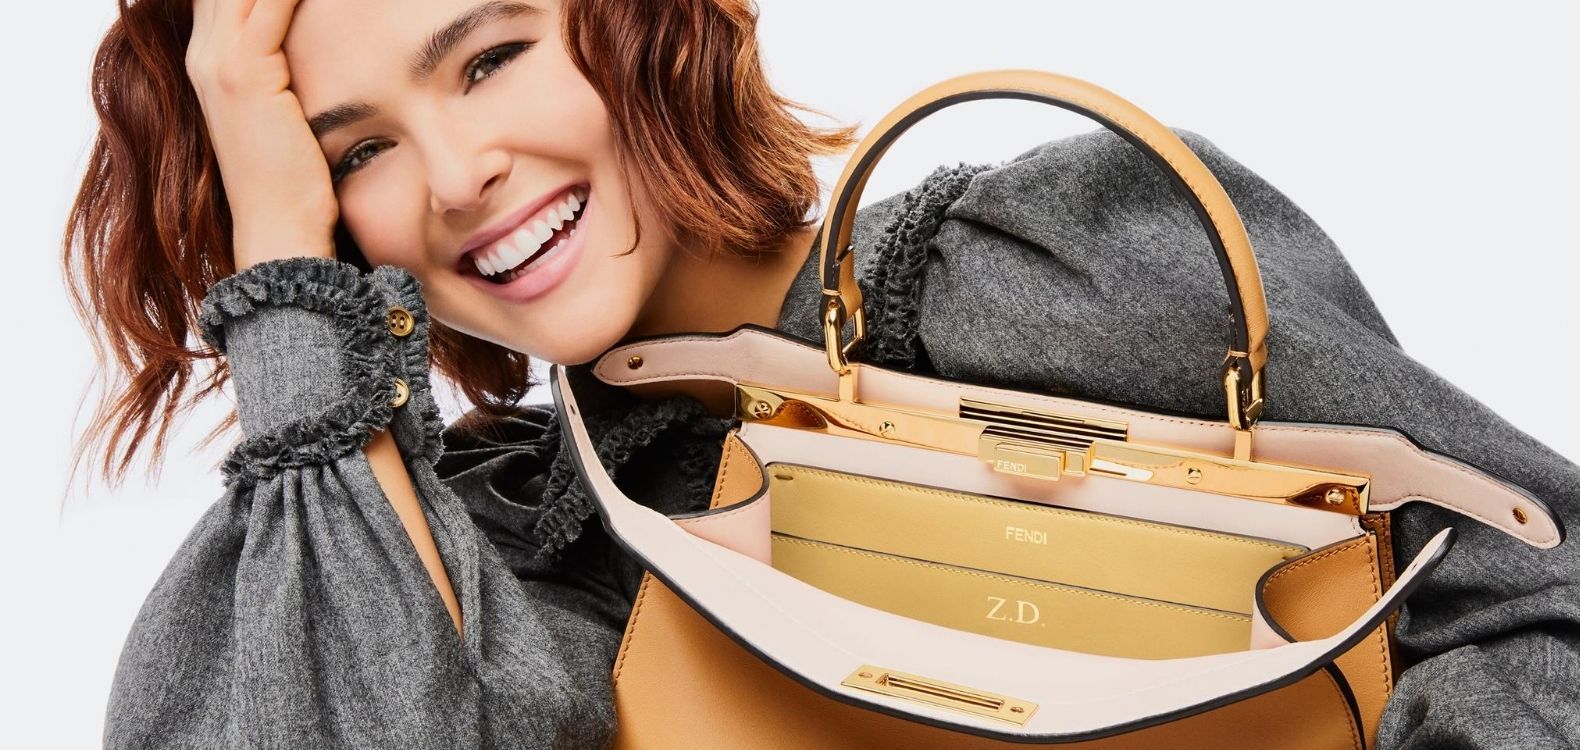 Fendi launches Image Campaign featuring Zoey Deutch and the Peekaboo